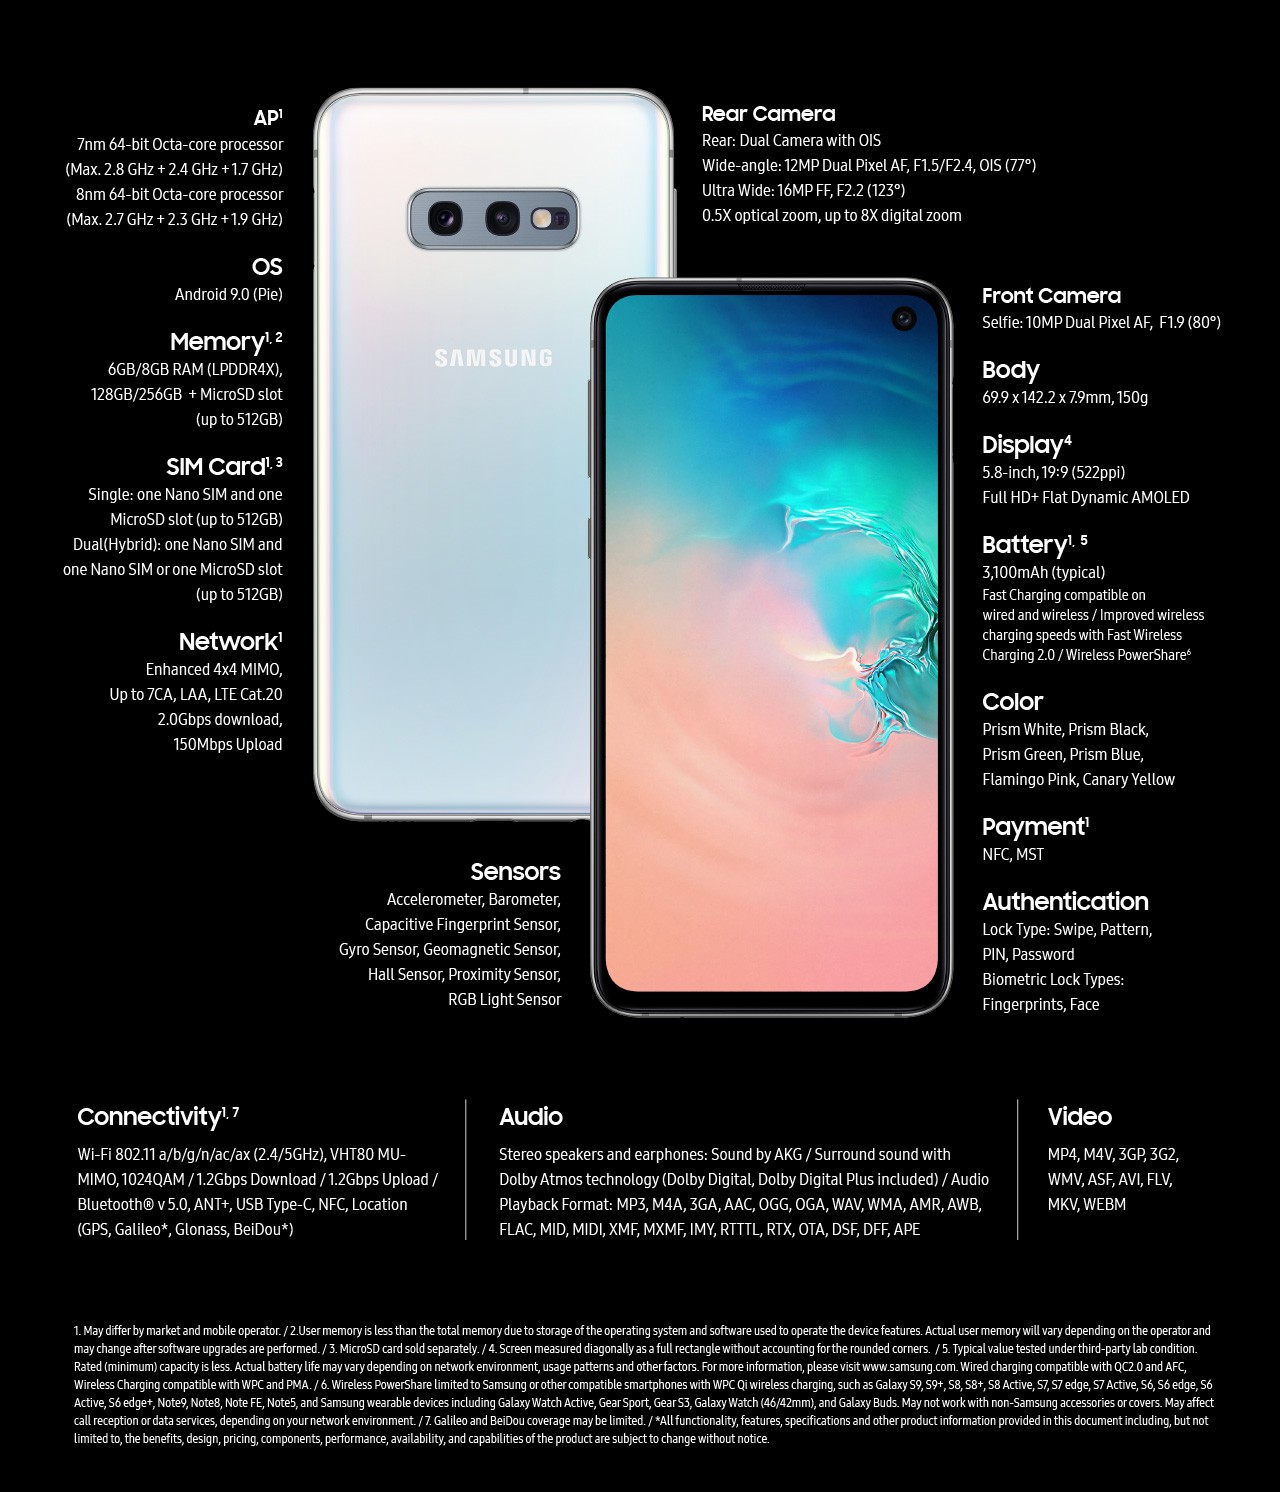 Samsung Galaxy S10 Series Offically Launched With Top-Notch Specs